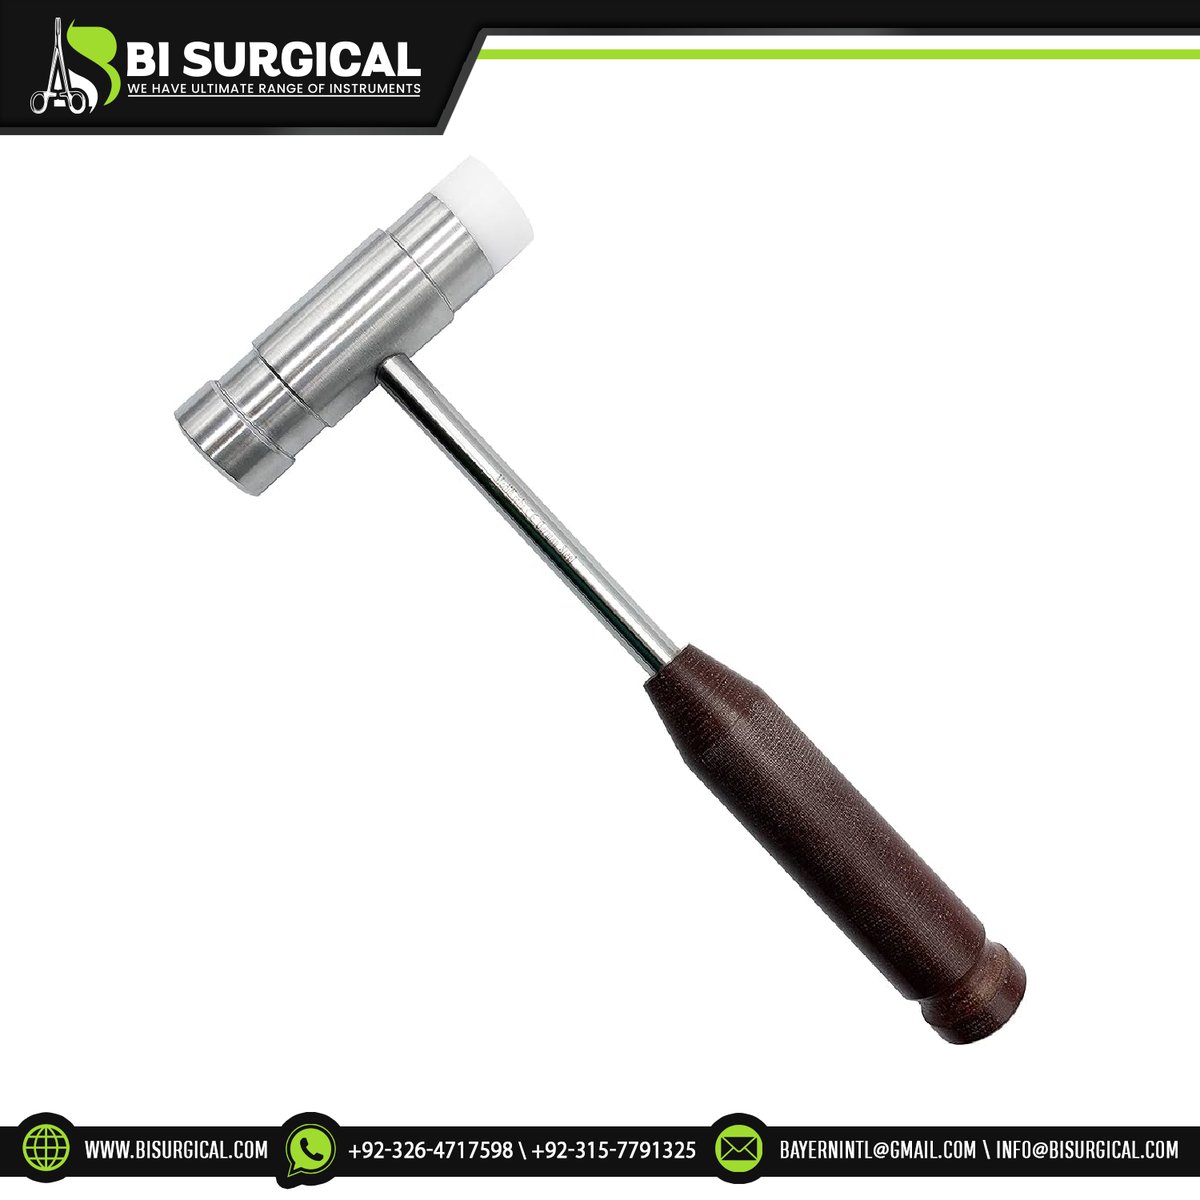 Enhance surgical precision with our Bone Mallet. Crafted for optimal bone manipulation, ensuring controlled and effective bone shaping. #BoneMallet #SurgicalInstruments #BoneSurgery #Orthopedics  #OrthopedicSurgeon #OrthopedicCare #OrthopedicTools #OrthopedicEquipment #Orthopedic